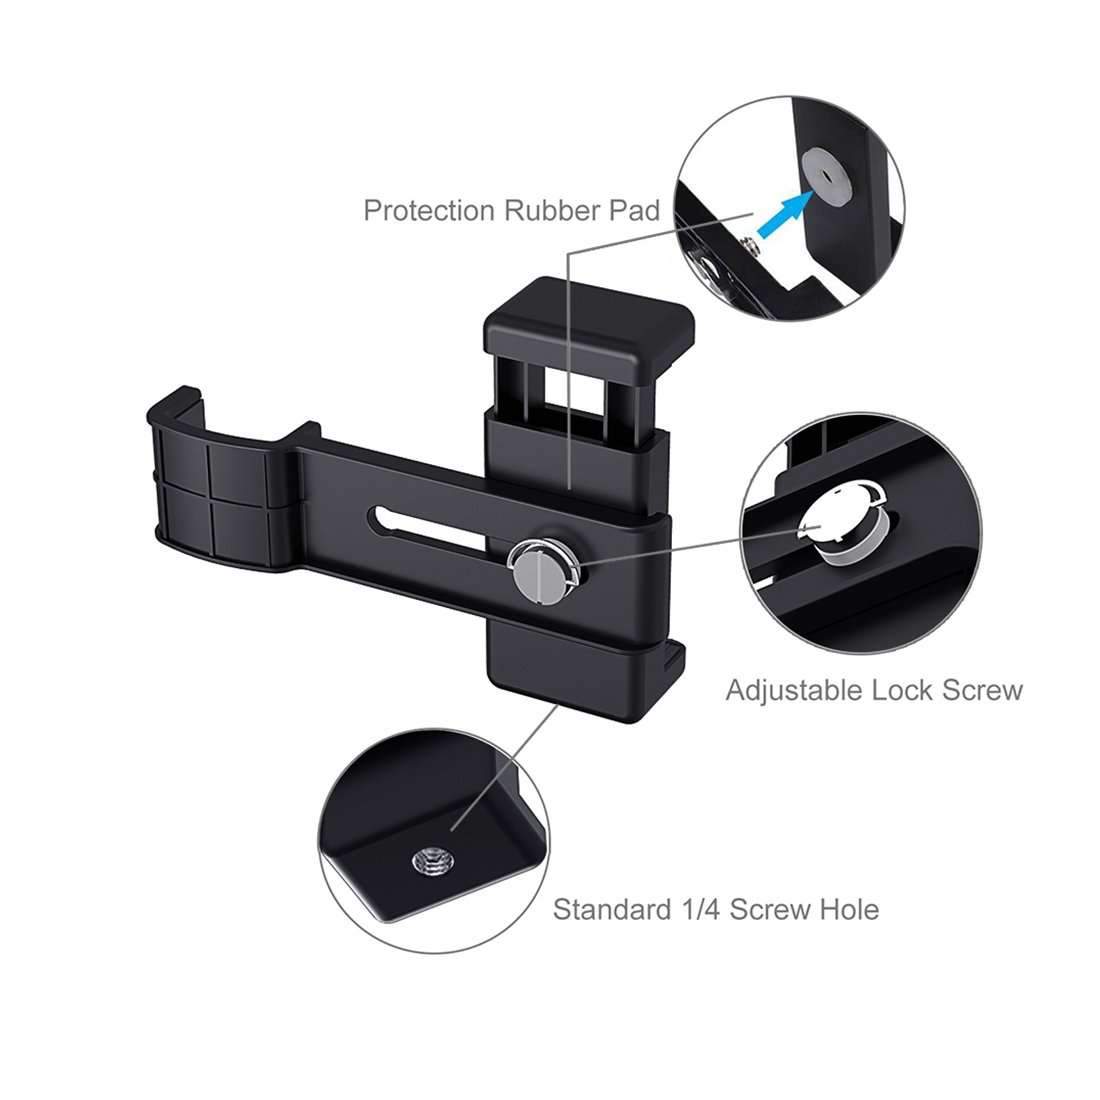 AMZER Foldable Tripod With Smartphone Fixing Clamp